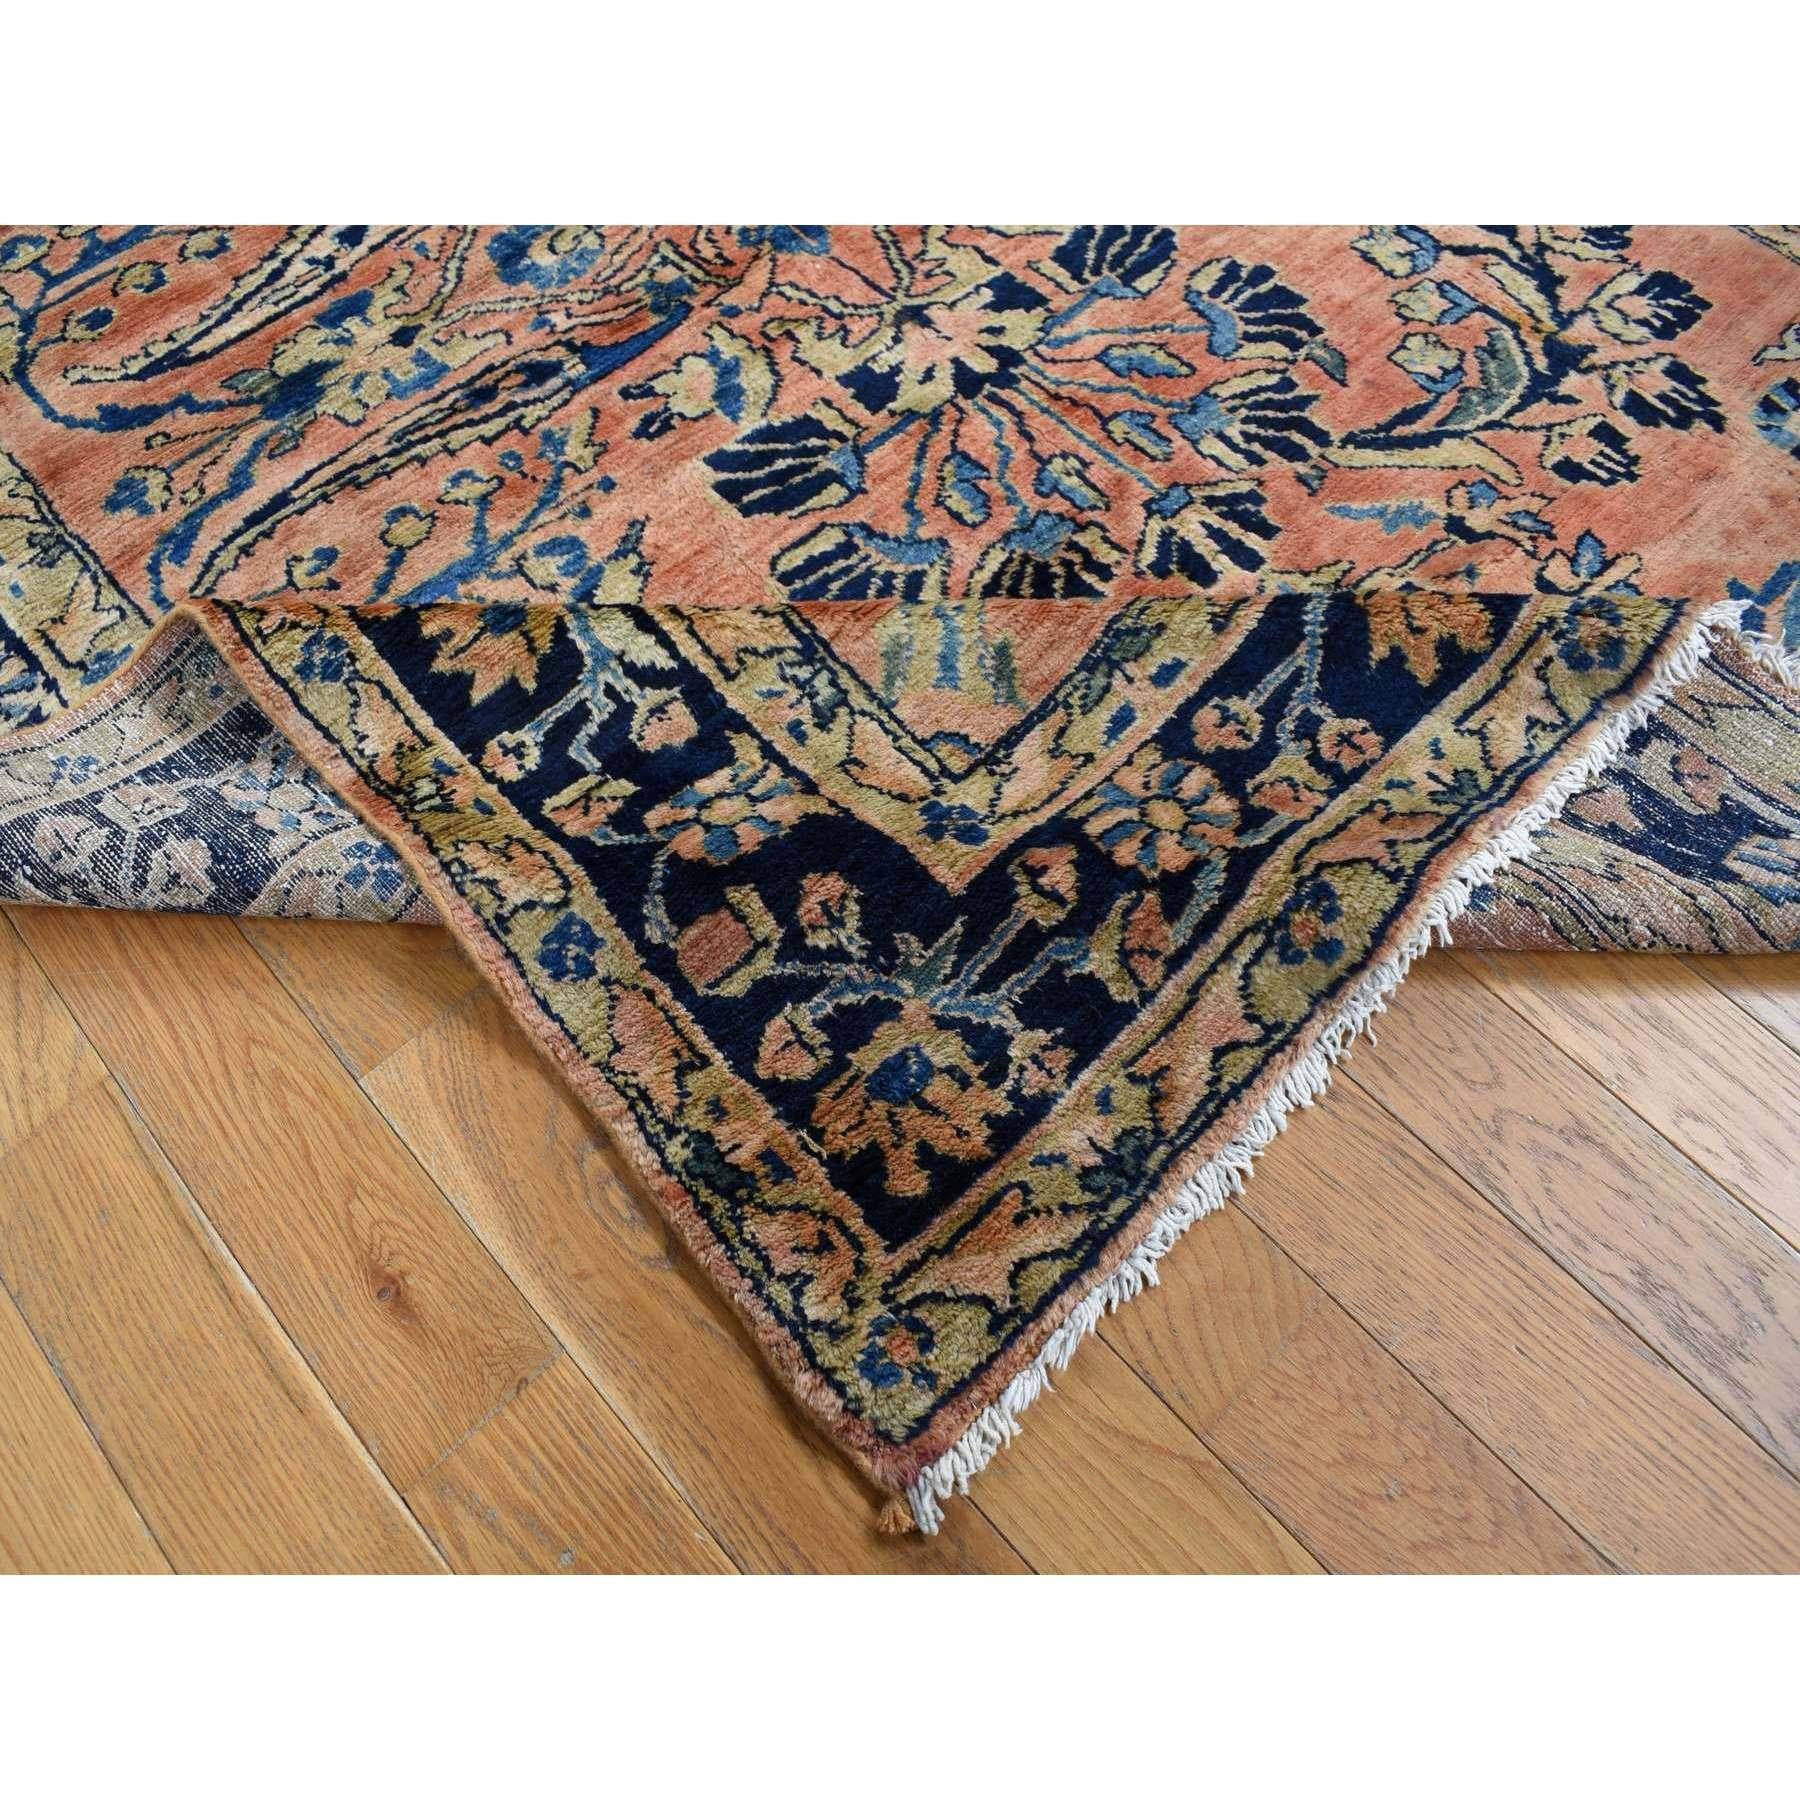 Medieval Coral Antique Persian Lilihan Mohajeren Flower Design Pure Wool Hand Knotted Rug